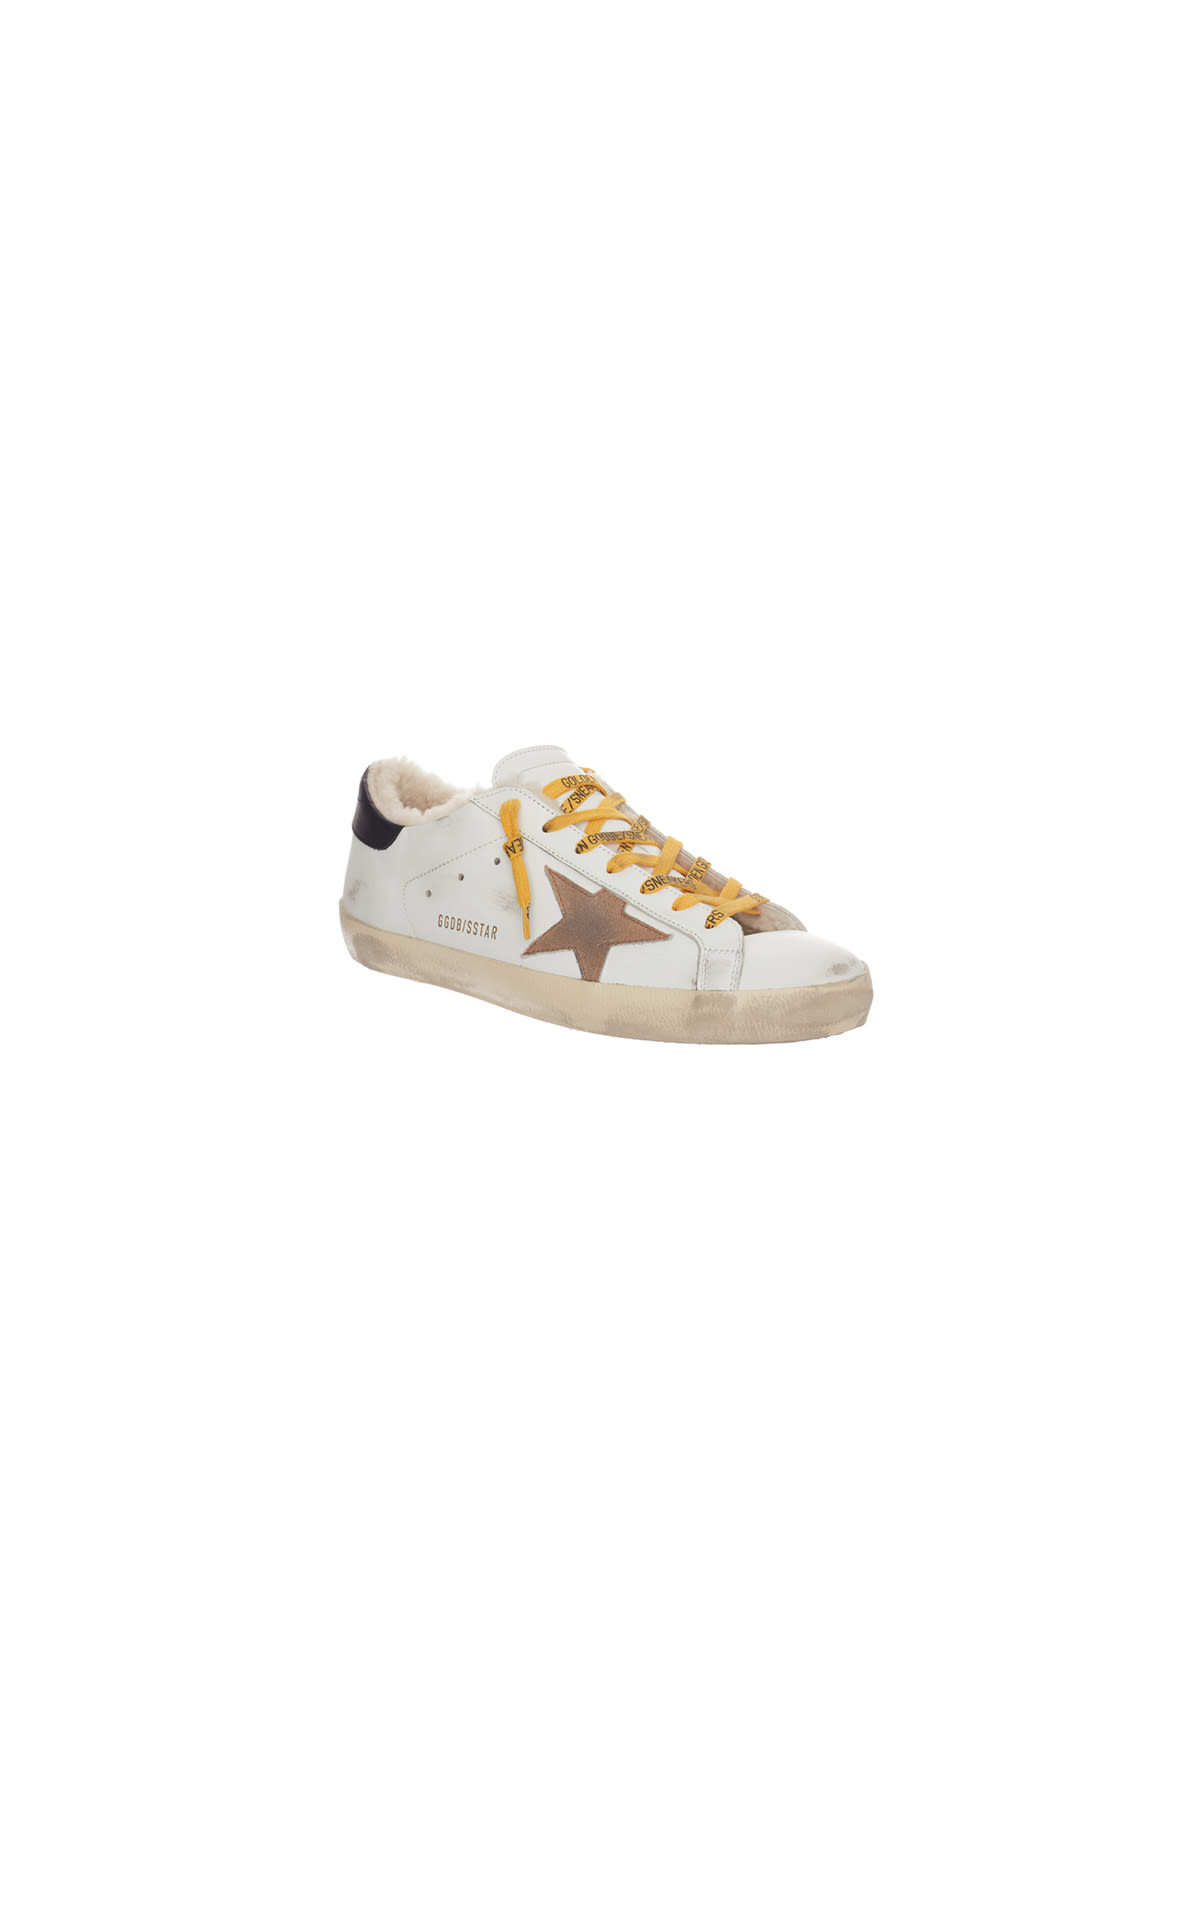 Golden Goose Super star classic sneakers with shearling lining from Bicester Village